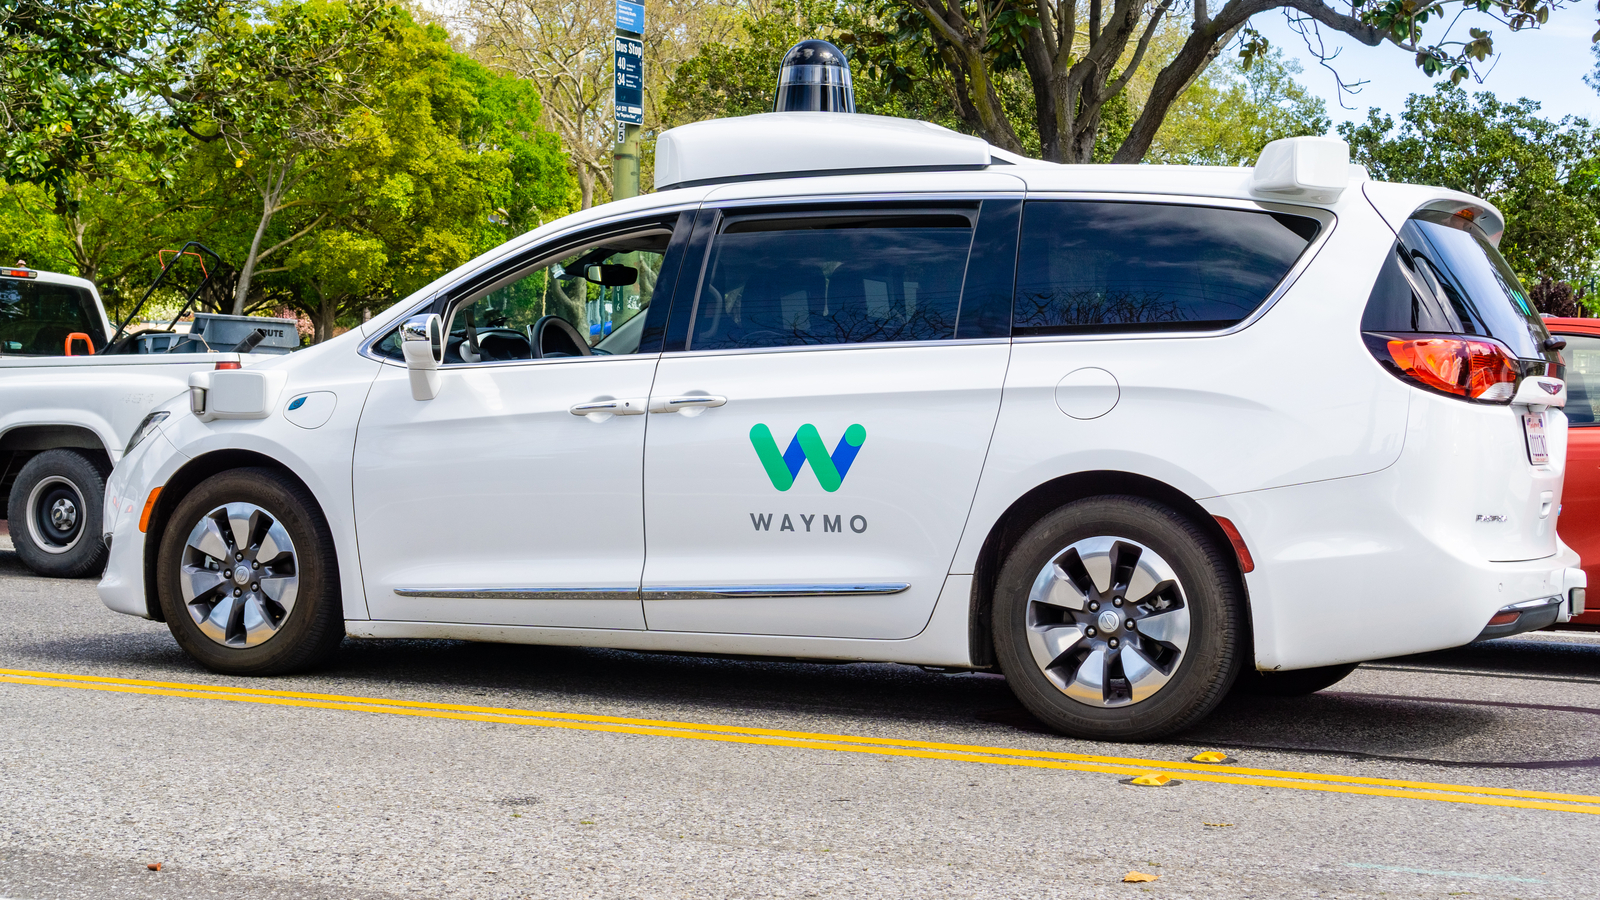 Waymo self driving car performing tests on a street near Google's headquarters, Silicon Valley